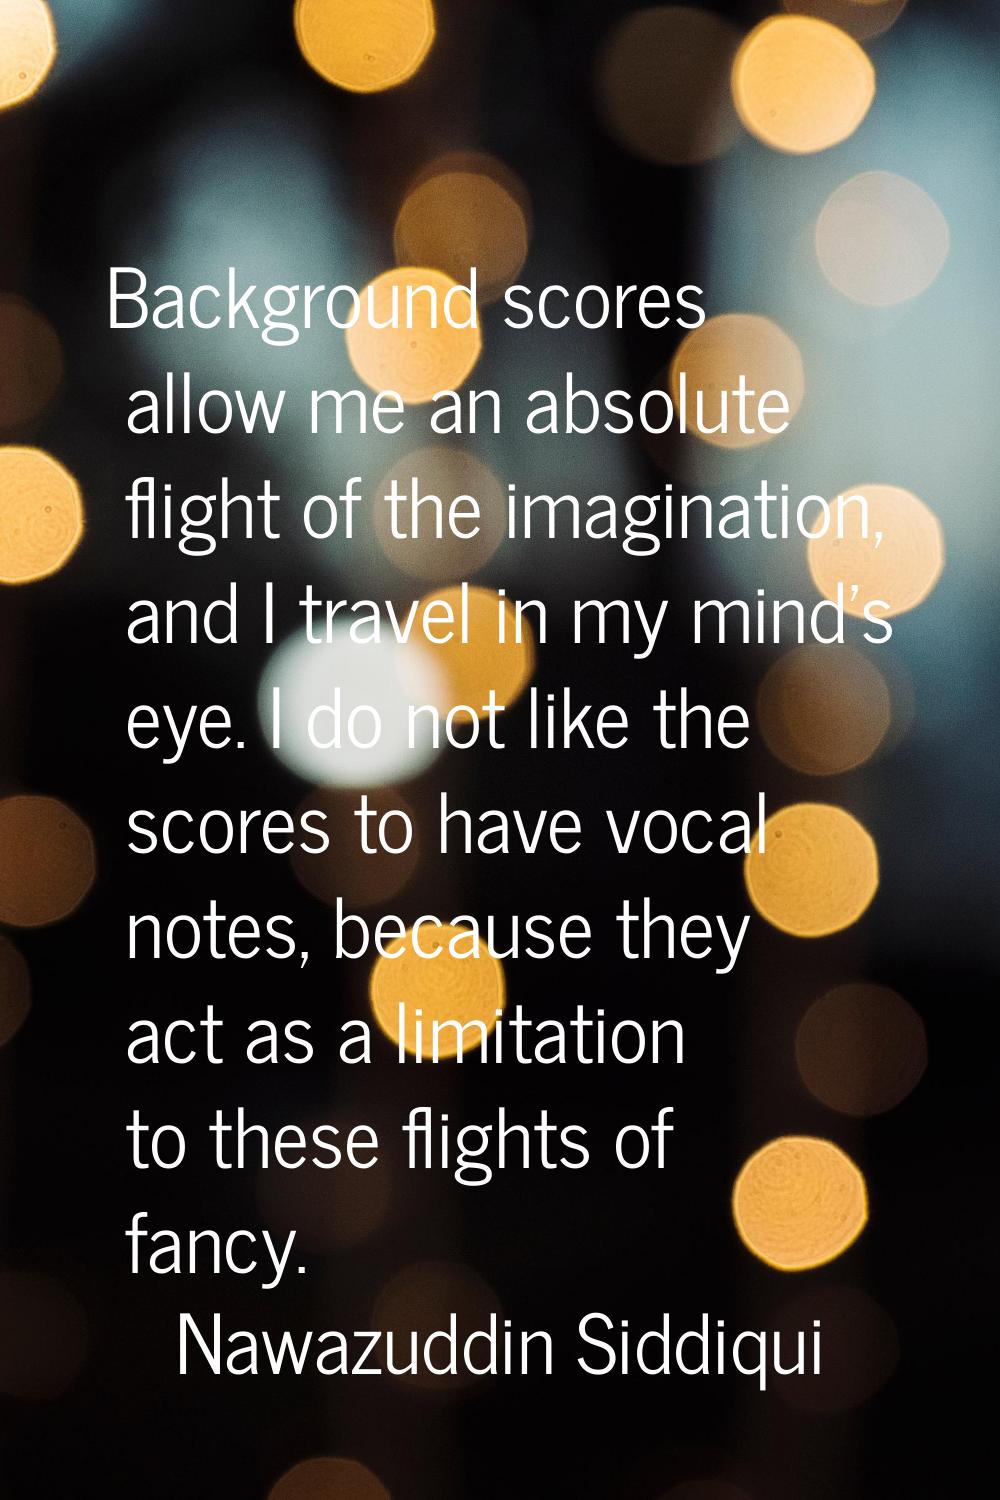 Background scores allow me an absolute flight of the imagination, and I travel in my mind's eye. I 